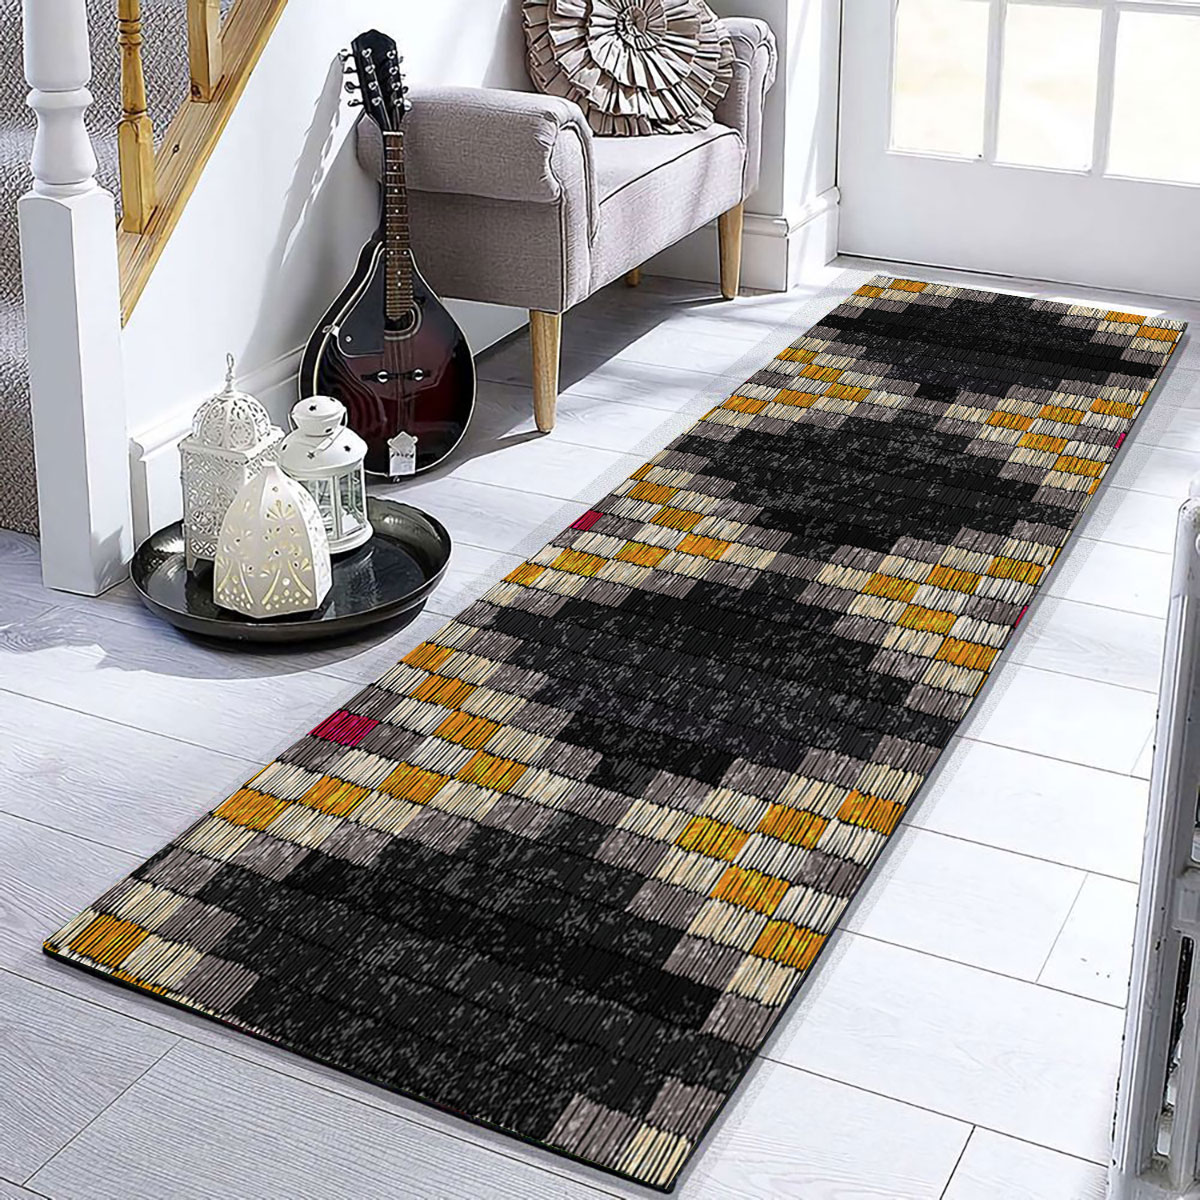 Embroidered Bohemian Style Runner Carpet